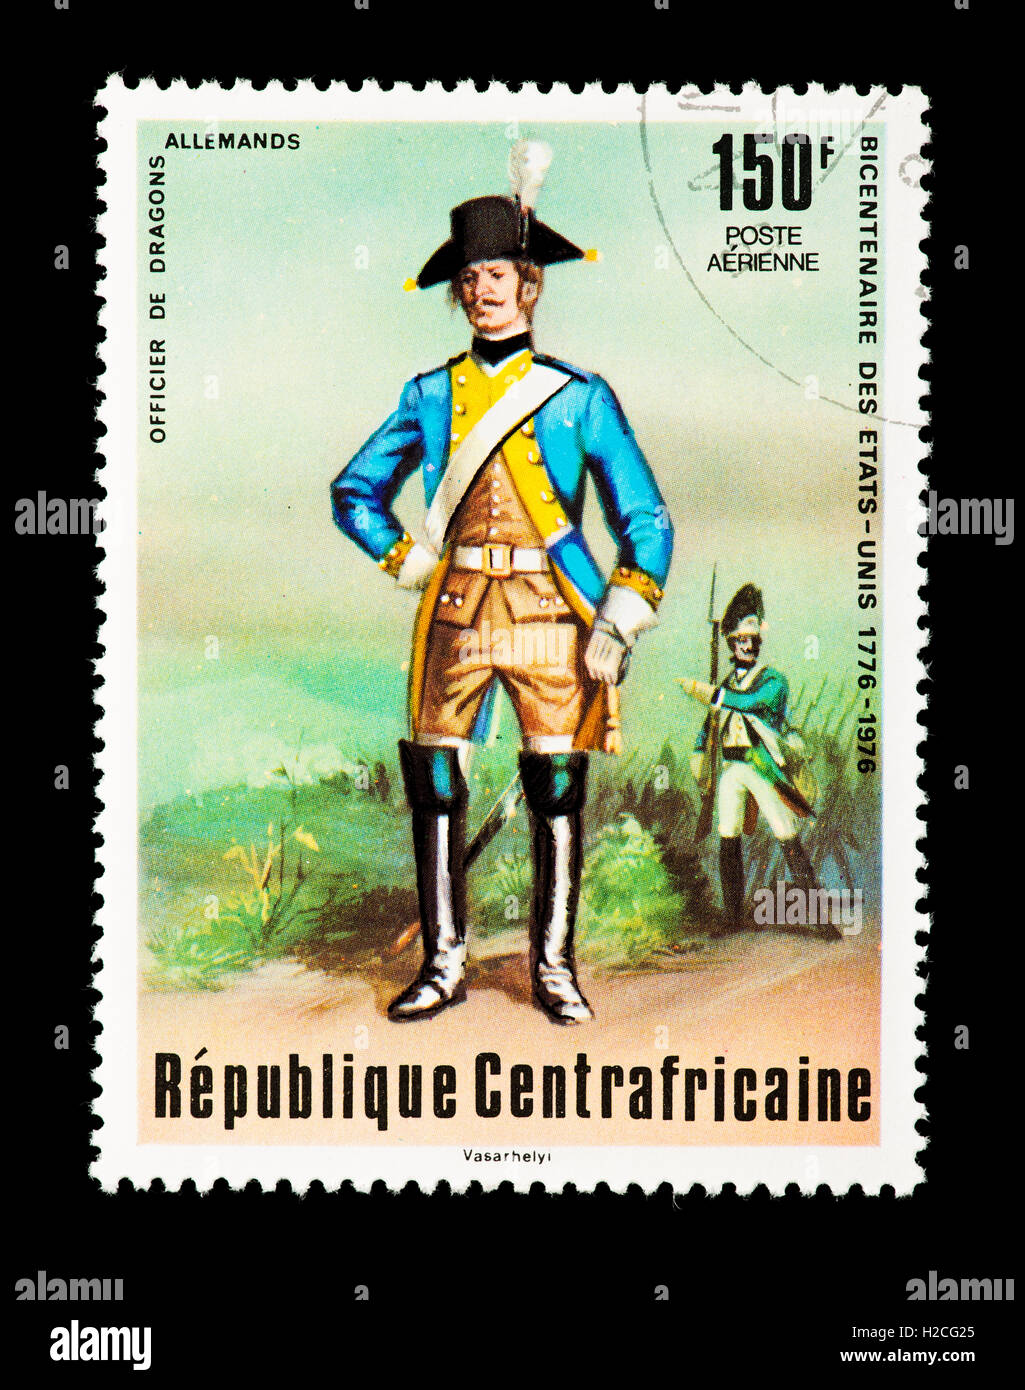 Postage stamp from the Central African Republic depicting a German dragoon soldier from the American Revolutionary war. Stock Photo